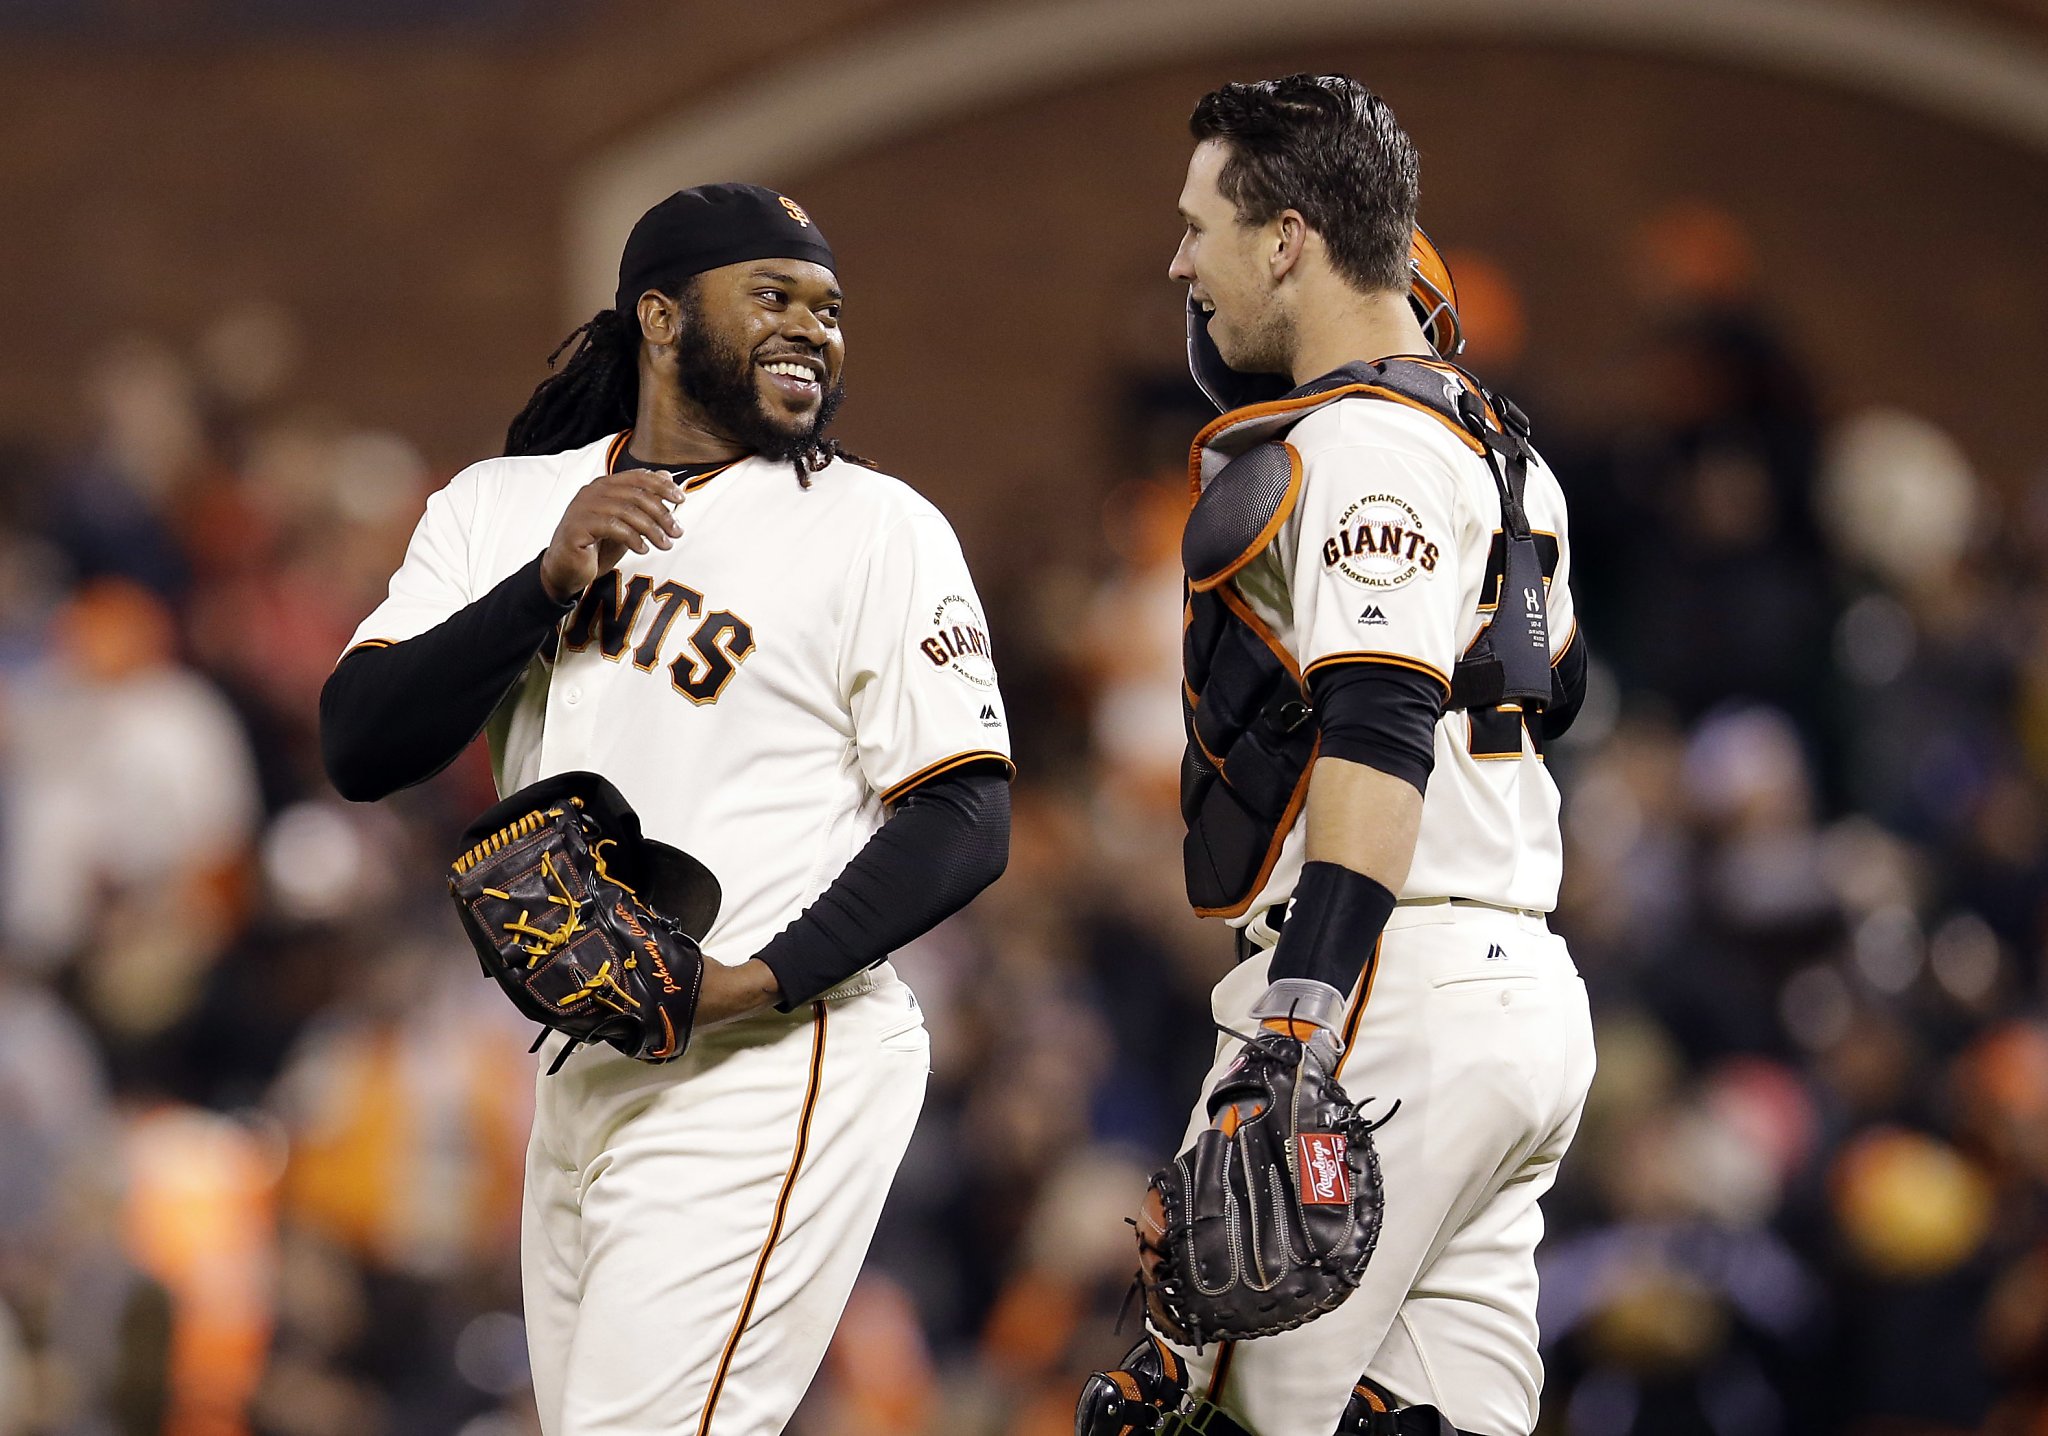 Giants' Johnny Cueto vs. Buster Posey and other spring story lines